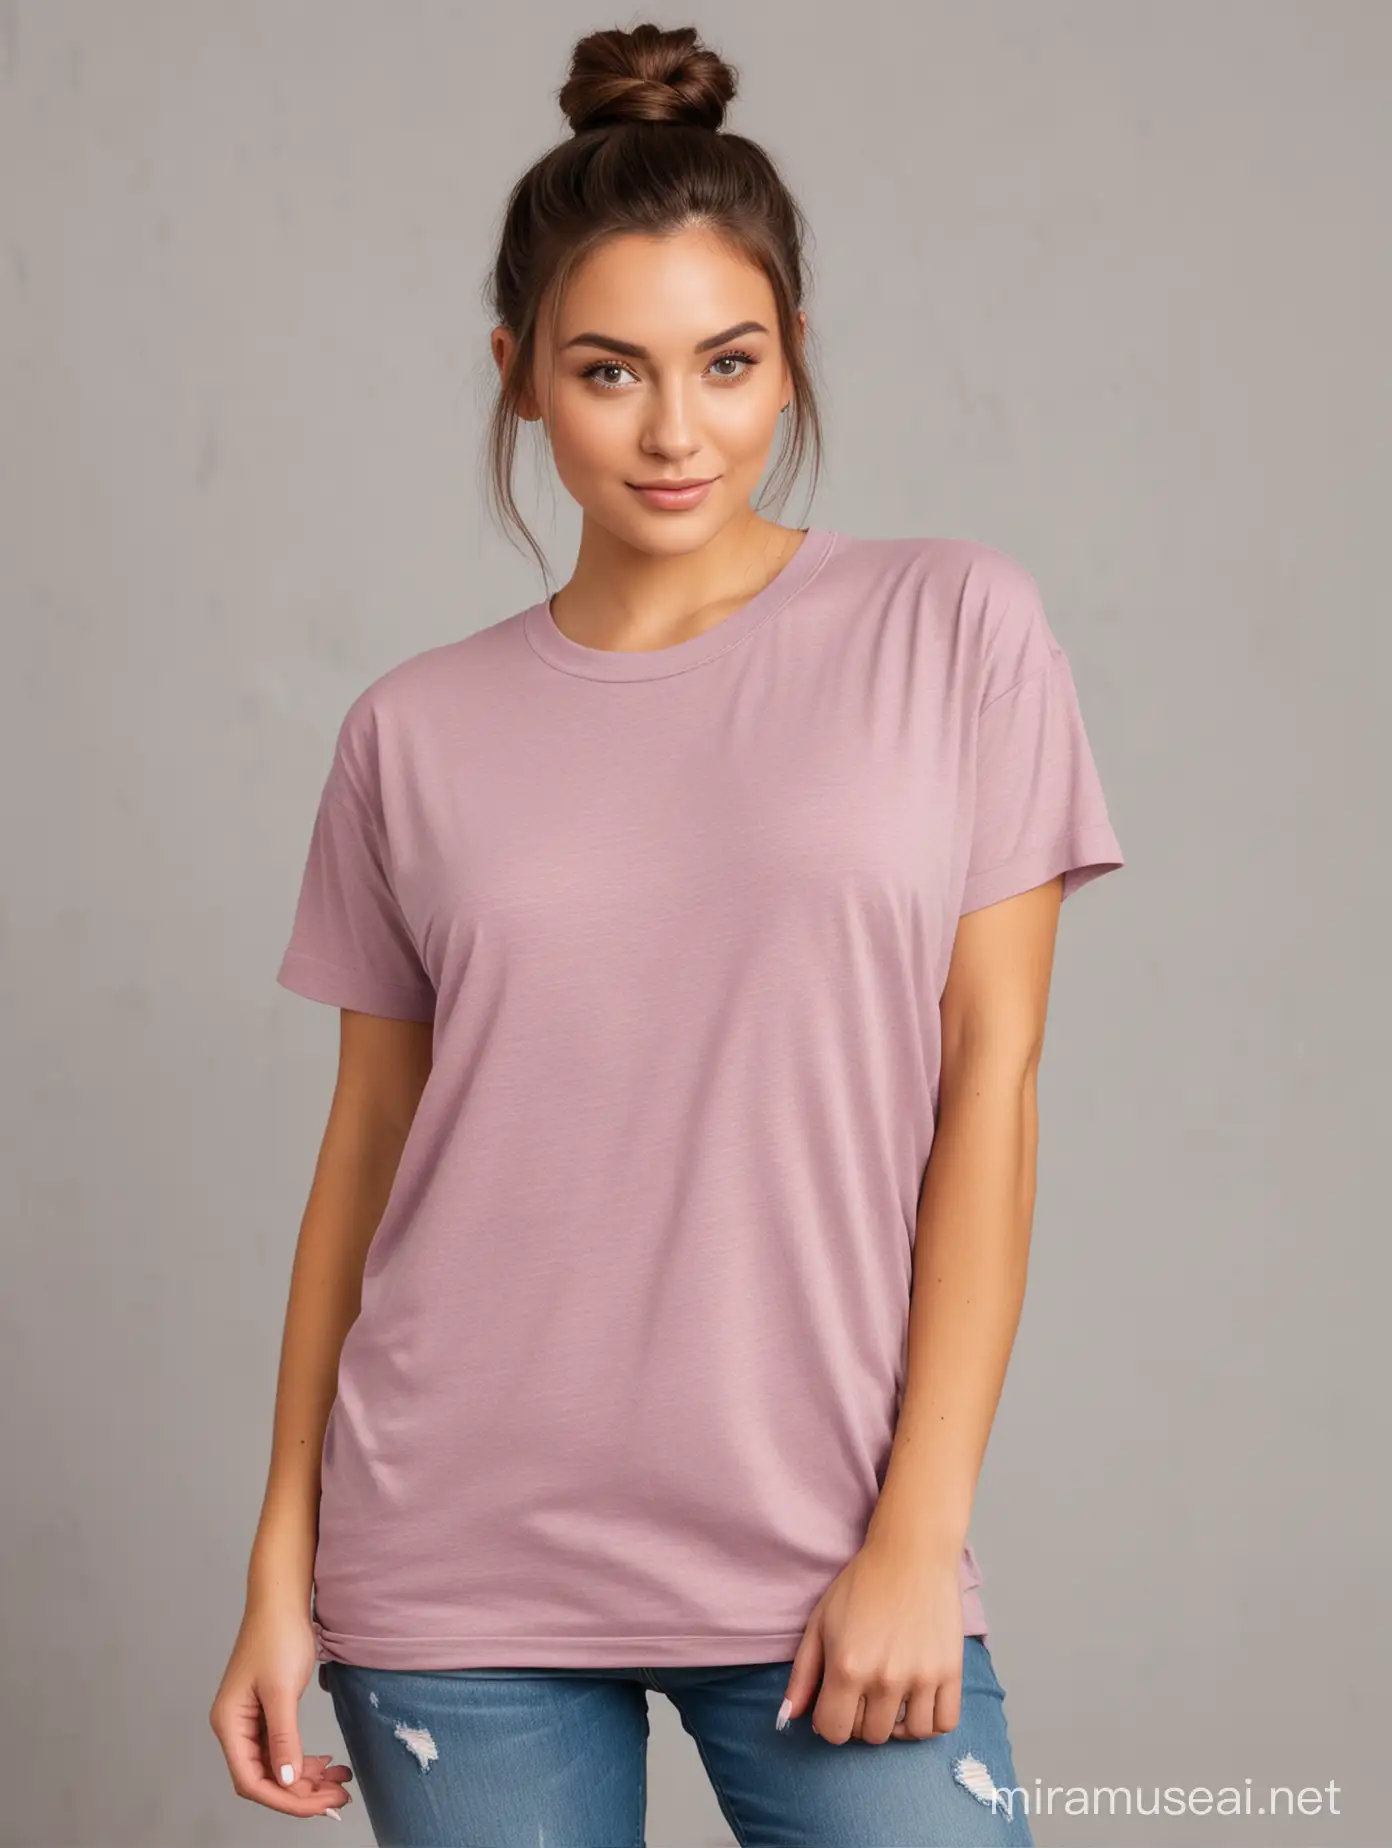 Model in Heather Mauve Bella Canvas TShirt with Tied Hair